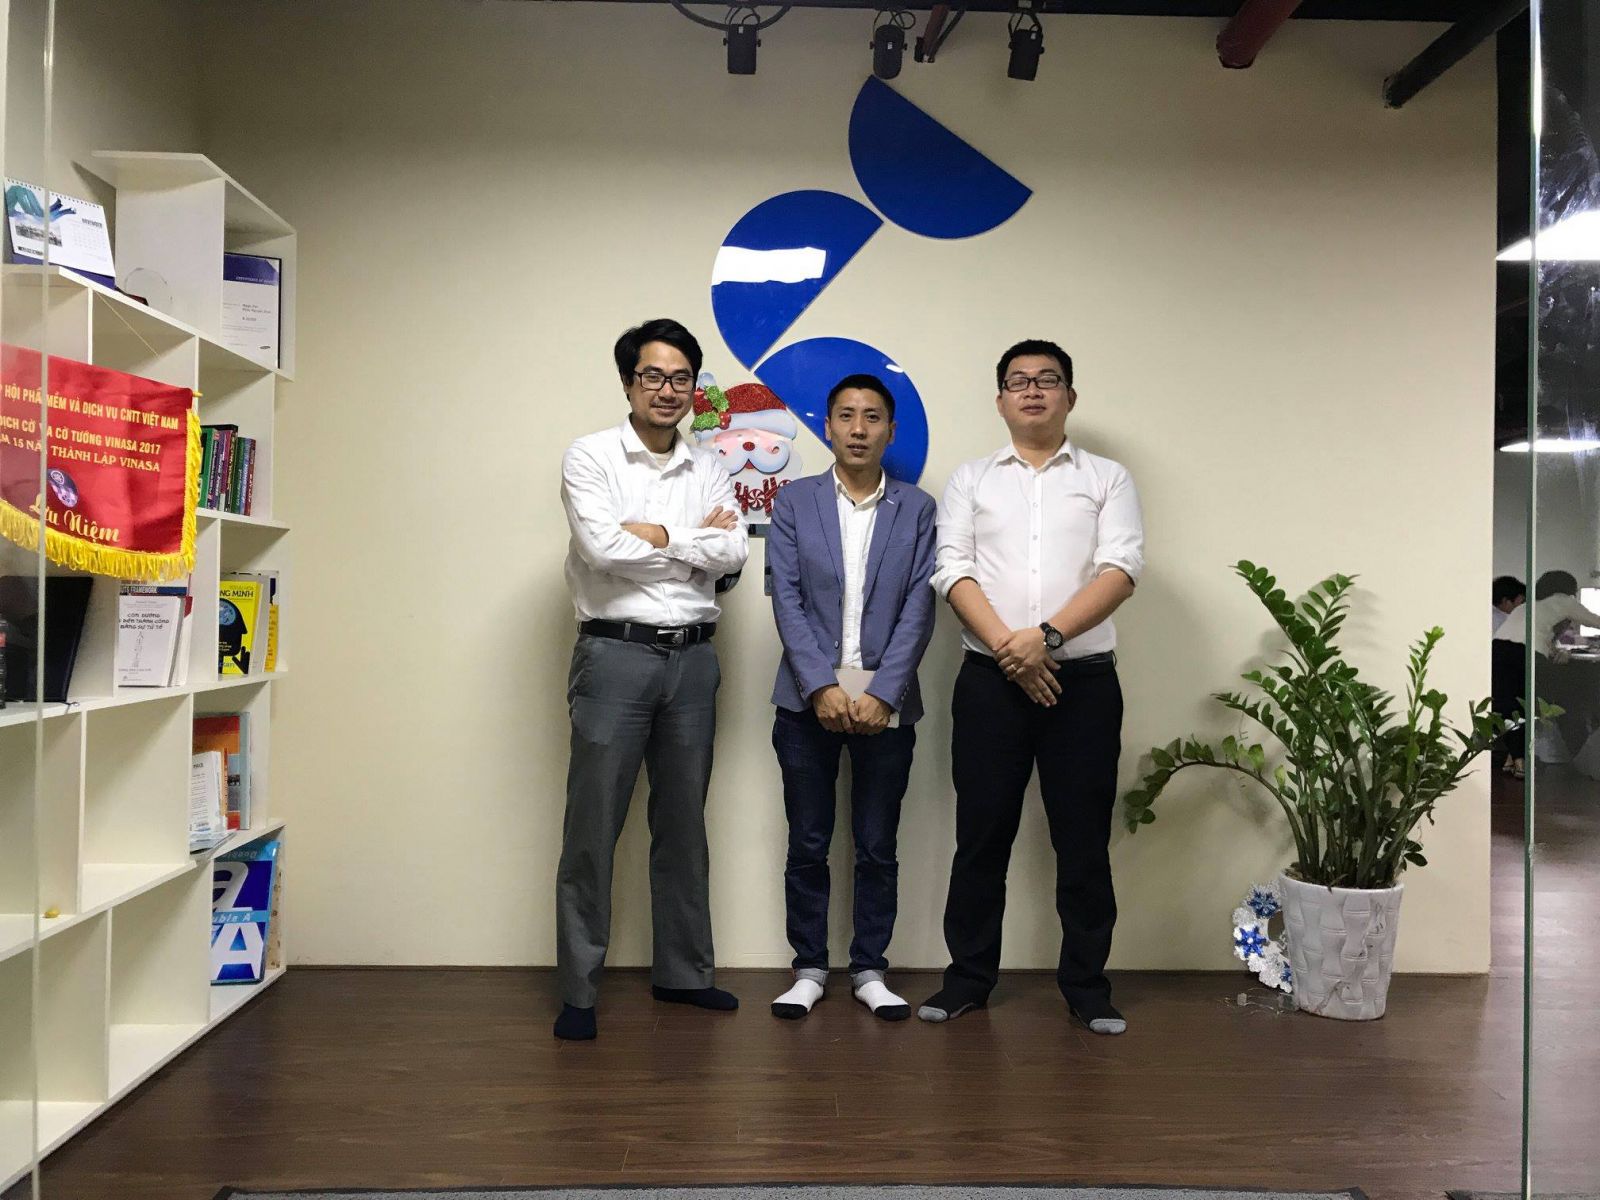 Senior Project Manager of China Communications Services visit SotaTek 's office